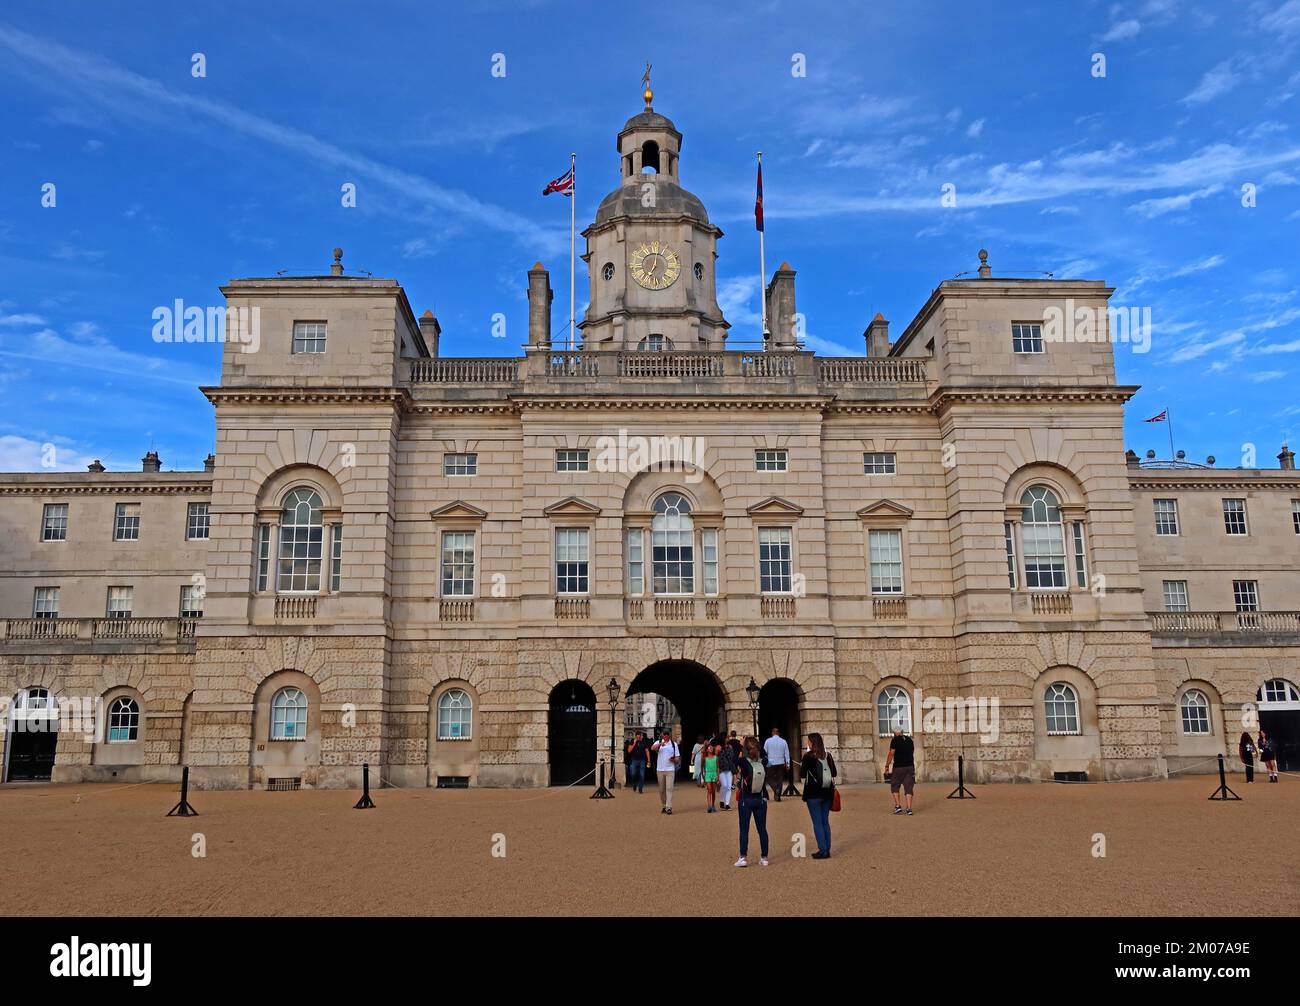 Horseguards Parade, Whitehall - Horse Guards Rd, Whitehall, London , England, Großbritannien, SW1A 2BE Stockfoto